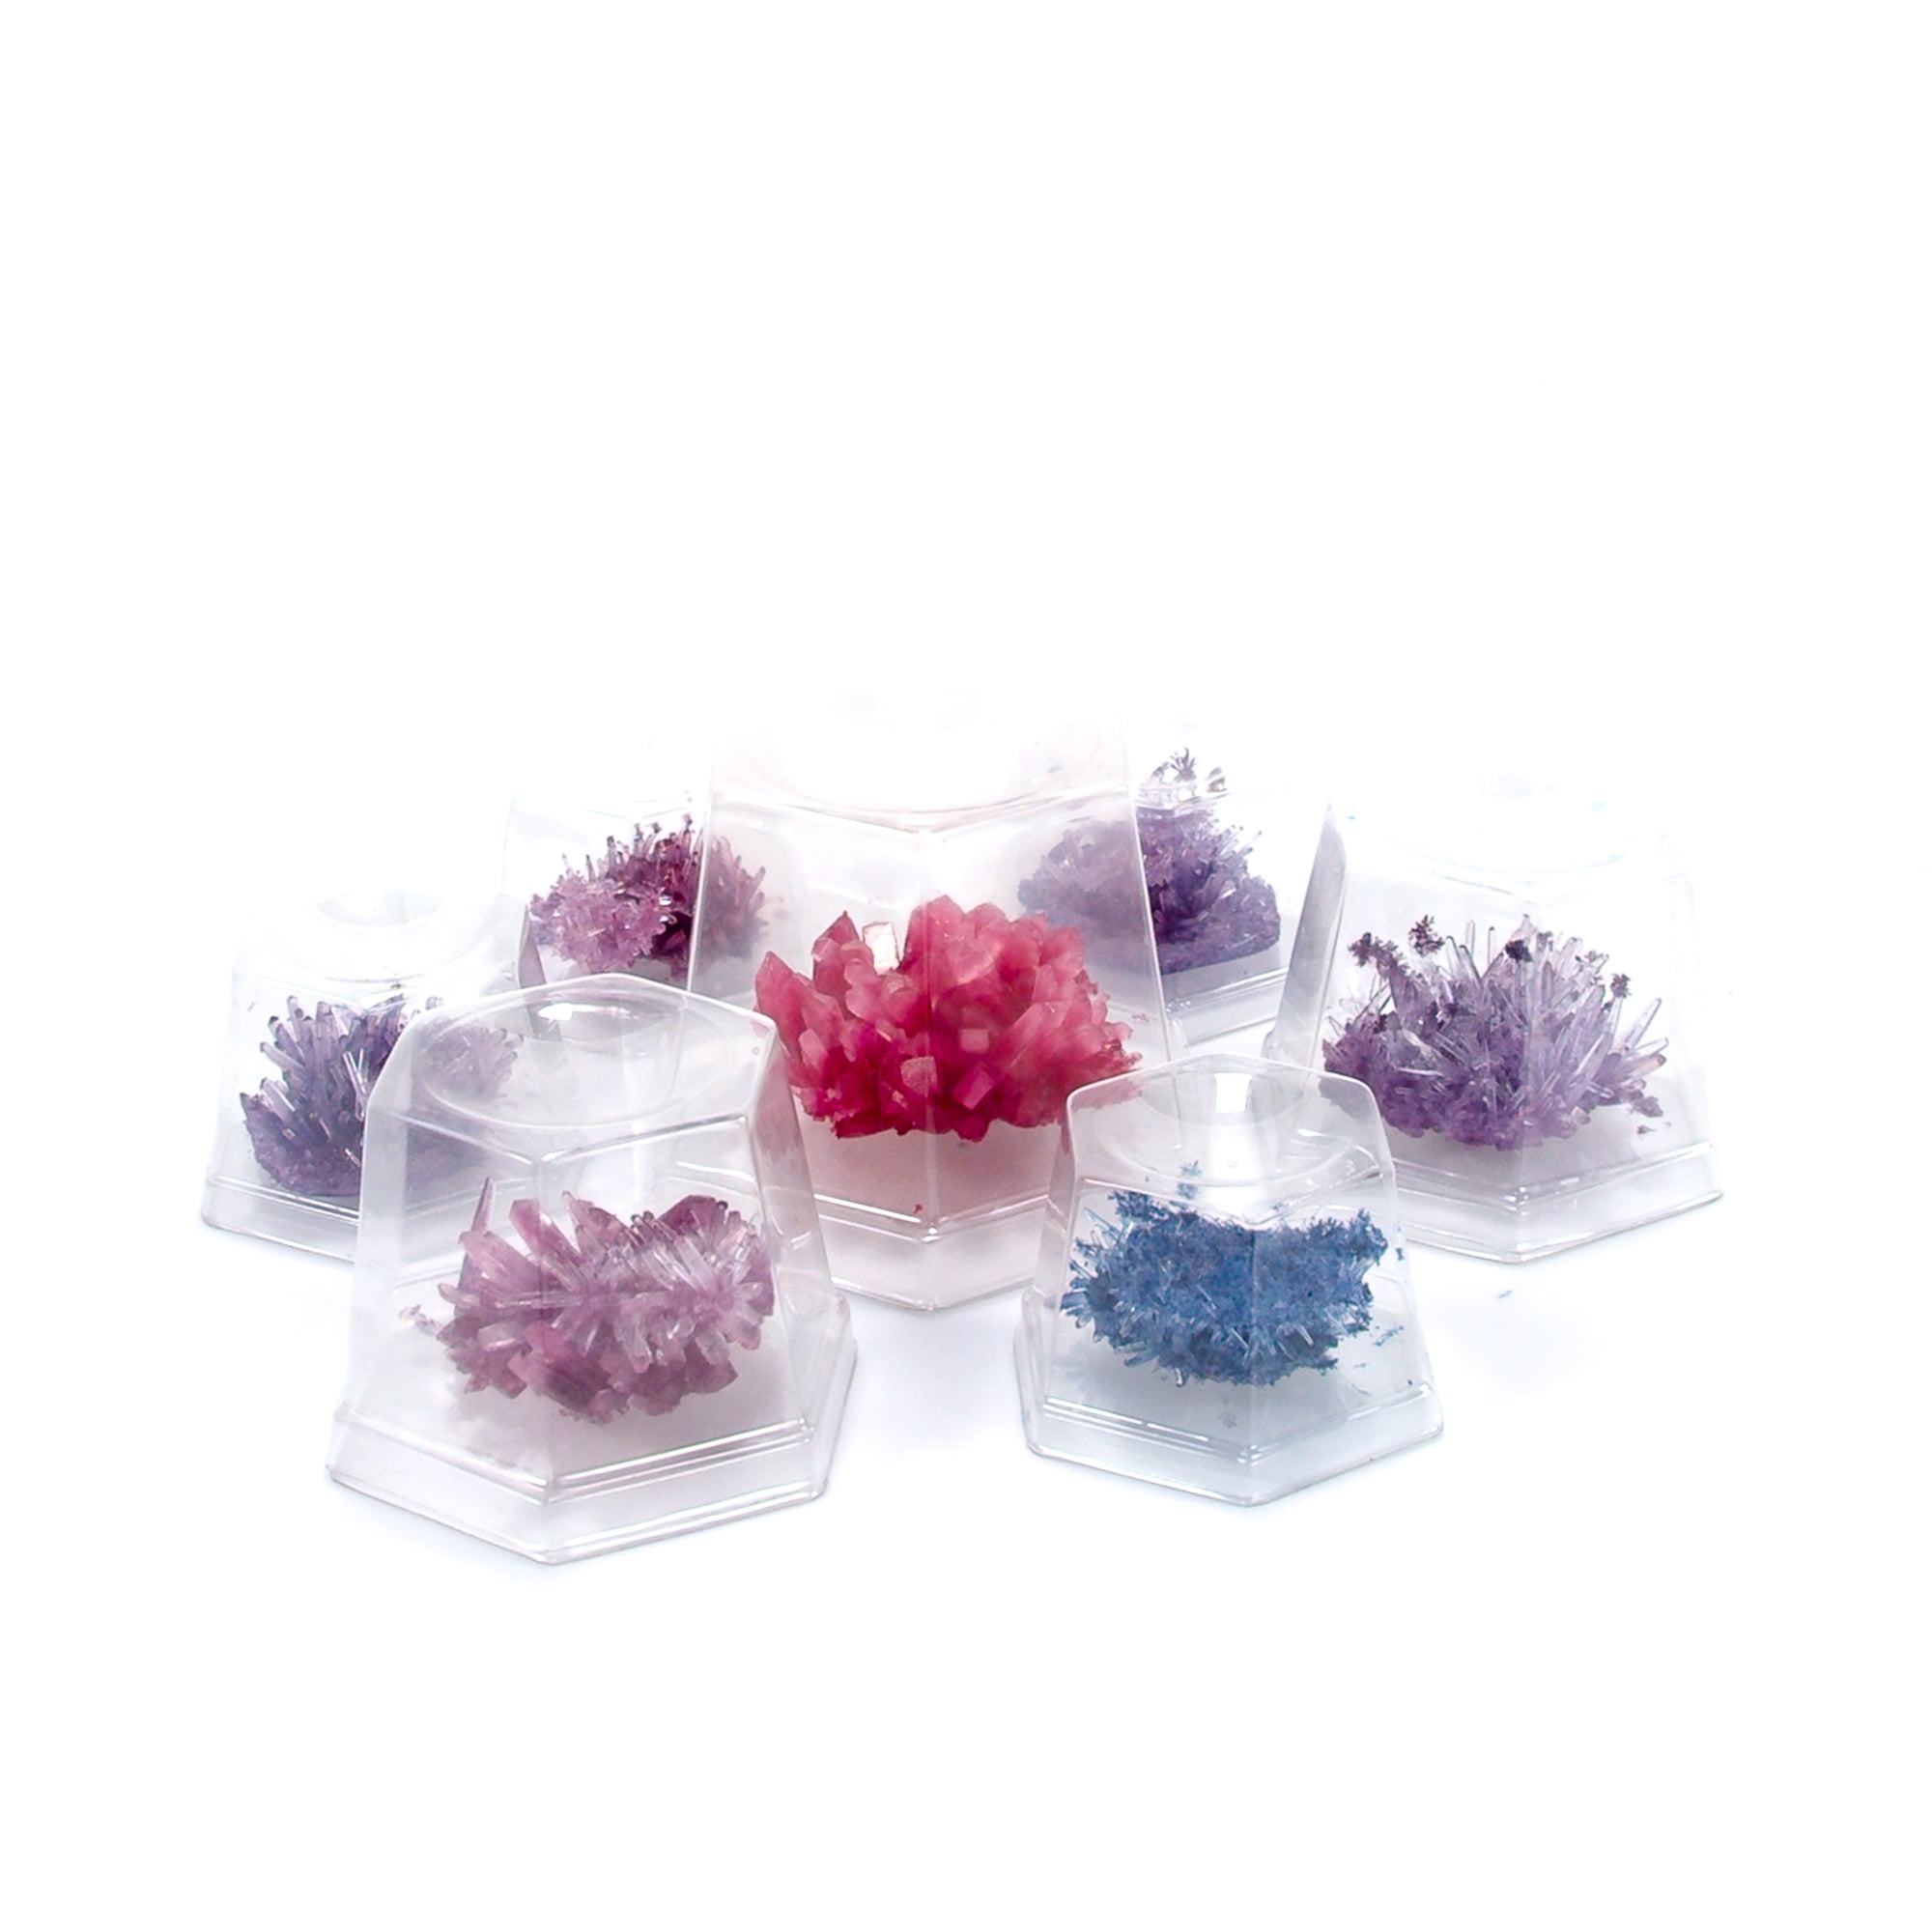 Crystal Growing Kit 4M Educational Toy Science Enthusiasts for sale online 